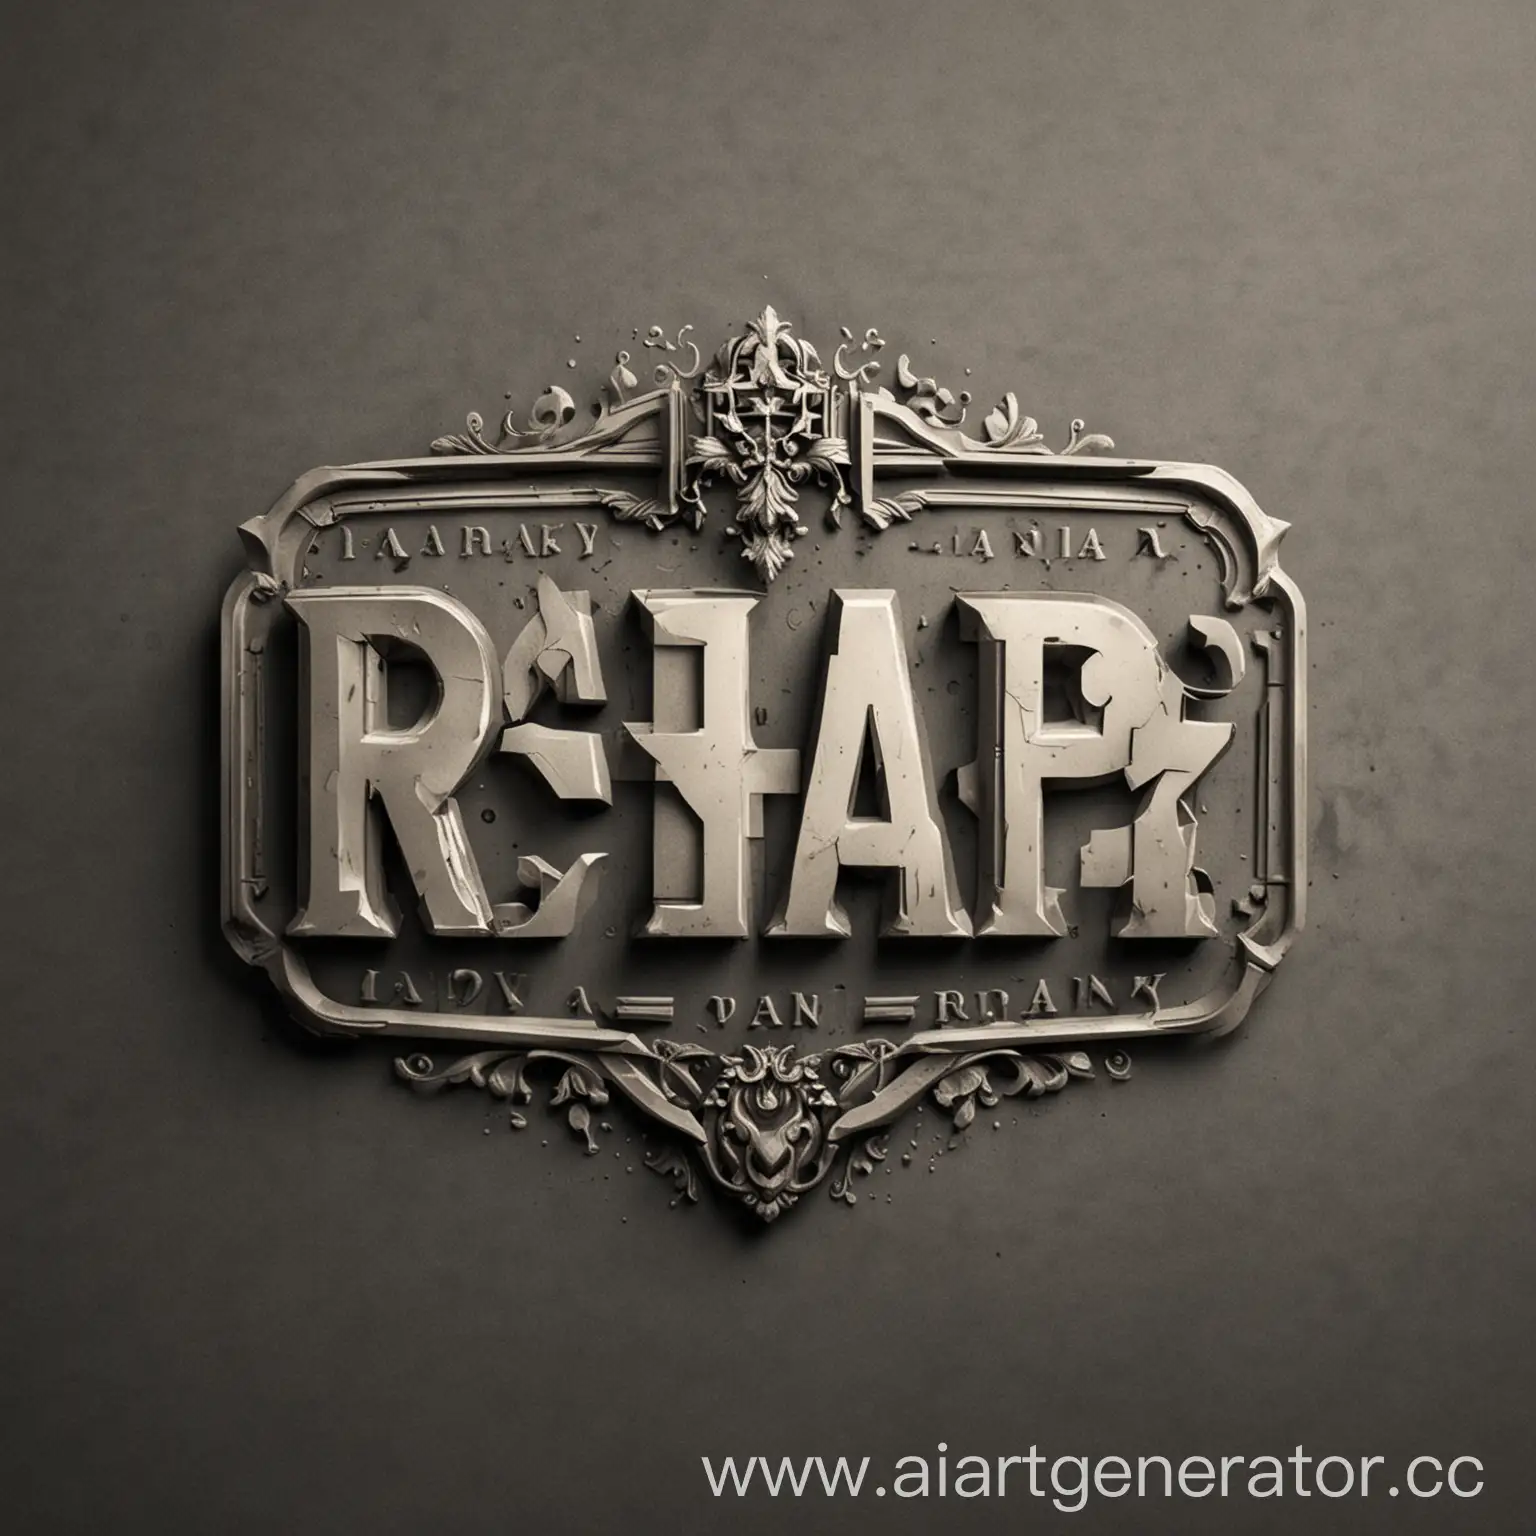 Abstract-Geometric-Shapes-in-Vibrant-Colors-Raab-Arseniy-Logo-Type